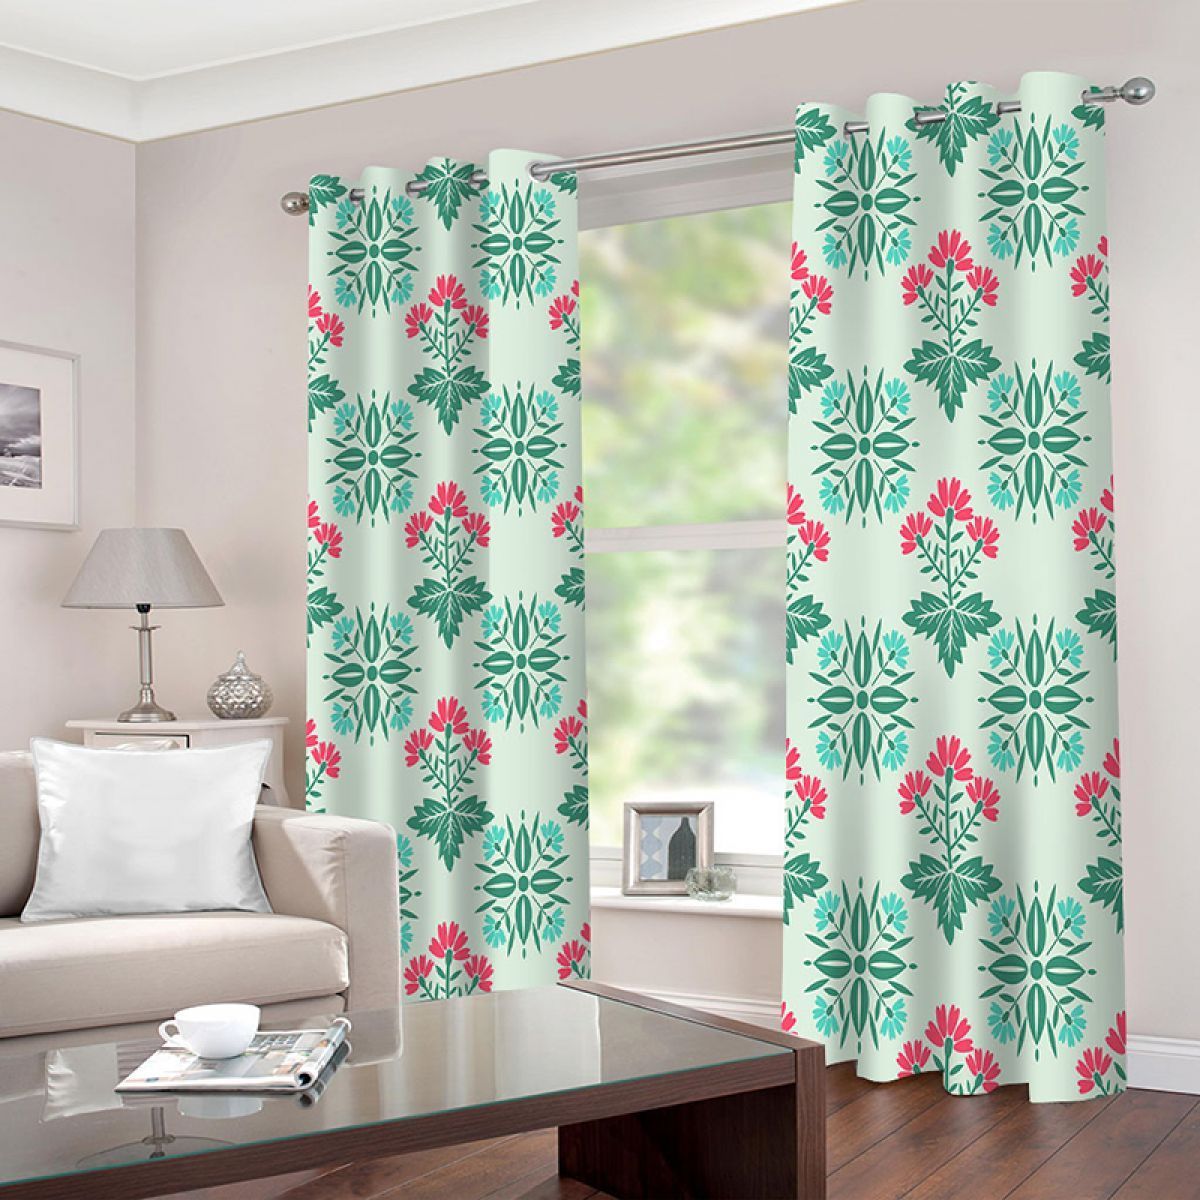 3d Painted Carnations And Leaves Printed Window Curtain Home Decor